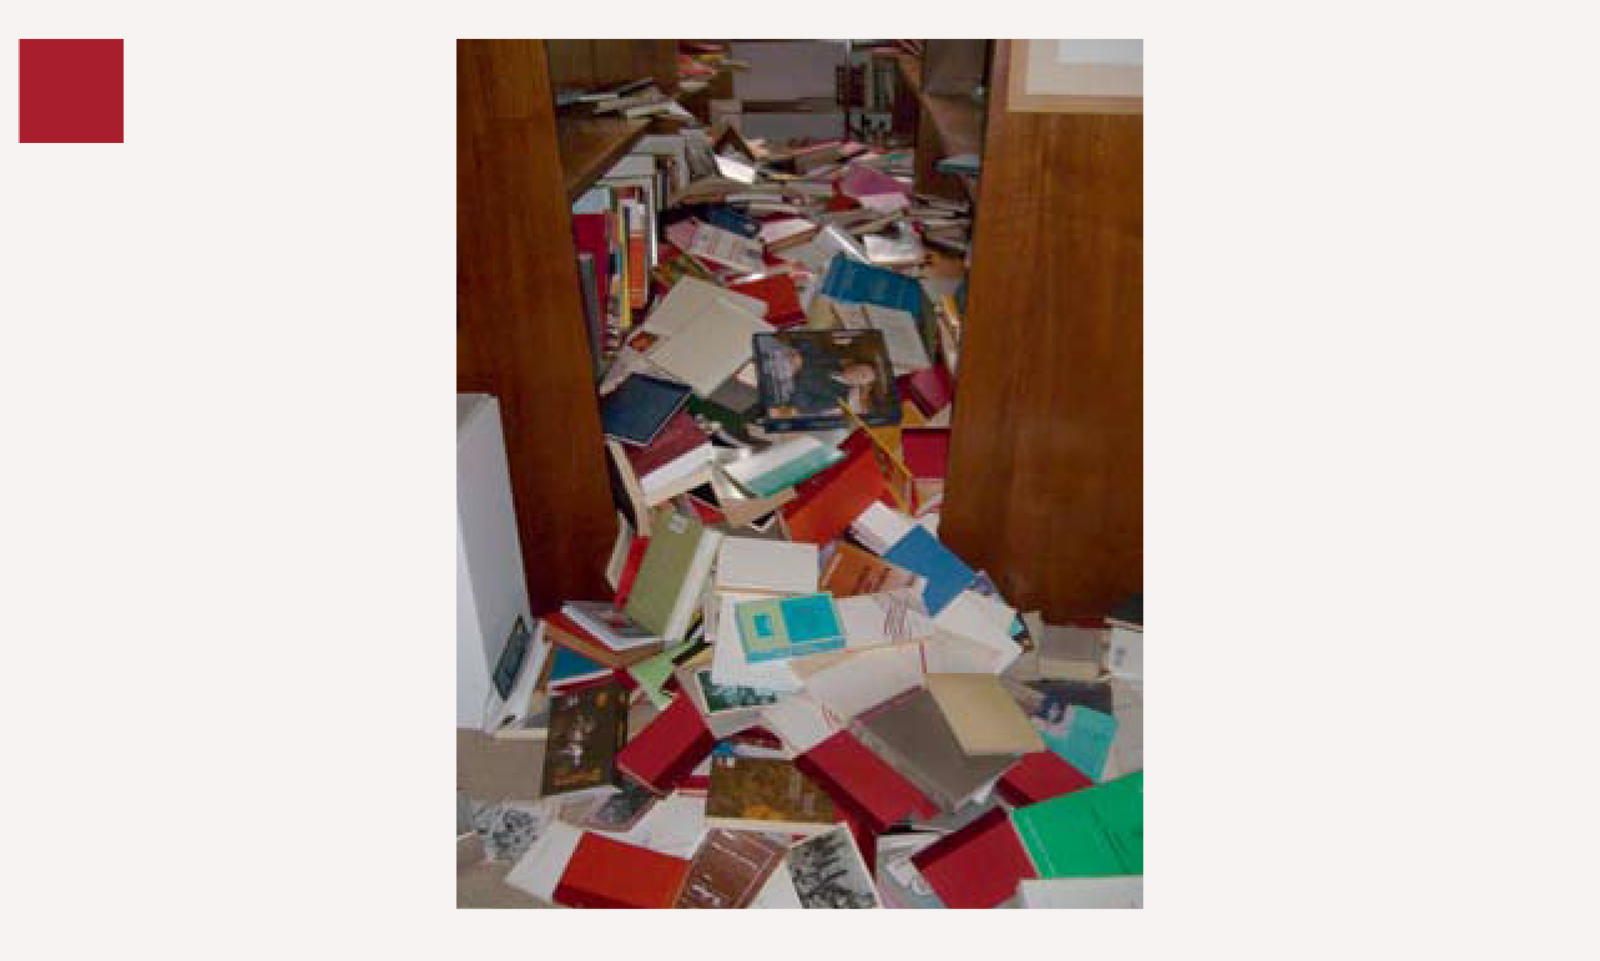 A photograph of toppled books at a private library in Peru in the aftermath of an earthquake on 15 August 2007.